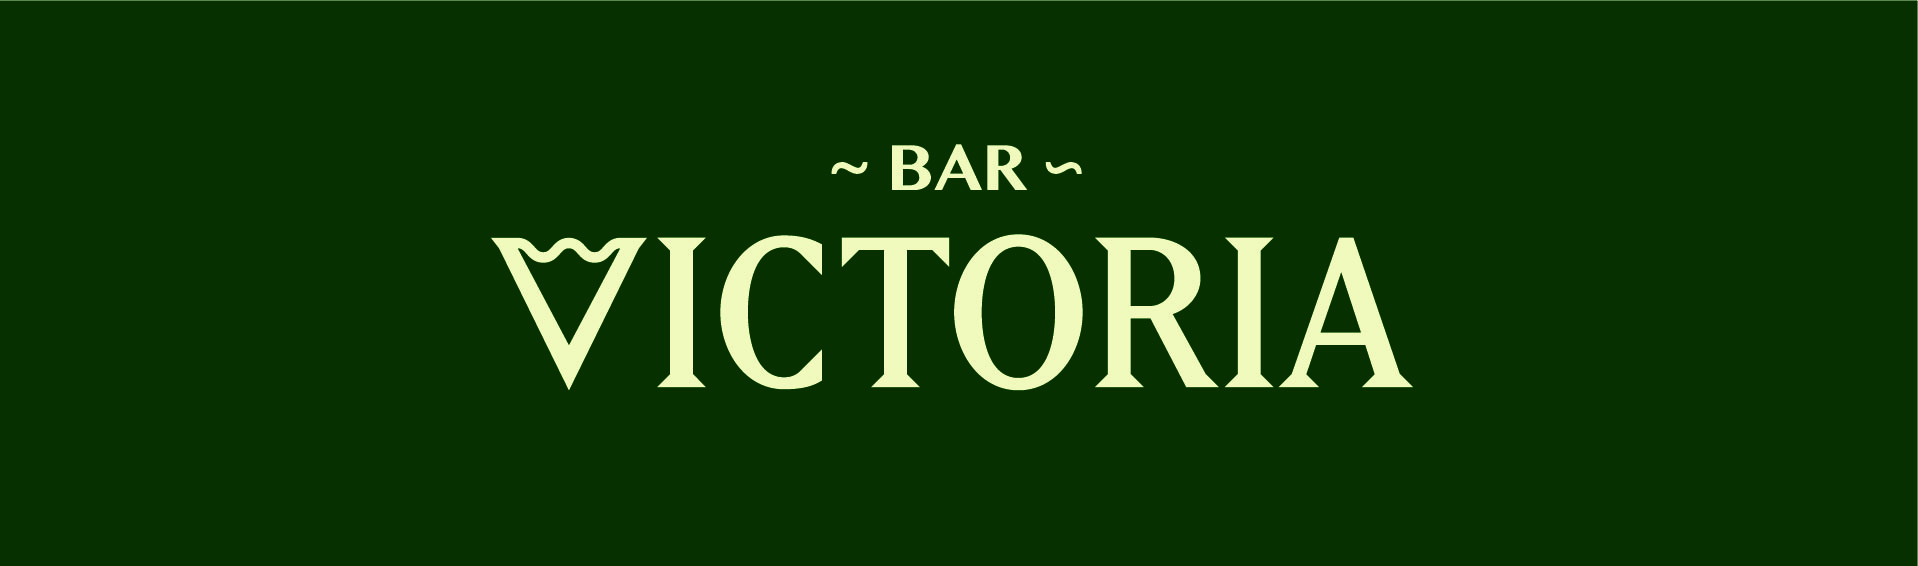 Graphic Communications work by Daniel McBrien. The logo. A wave closing up the Letter V at the start of the word Victoria, with the word Bar sitting above smaller.